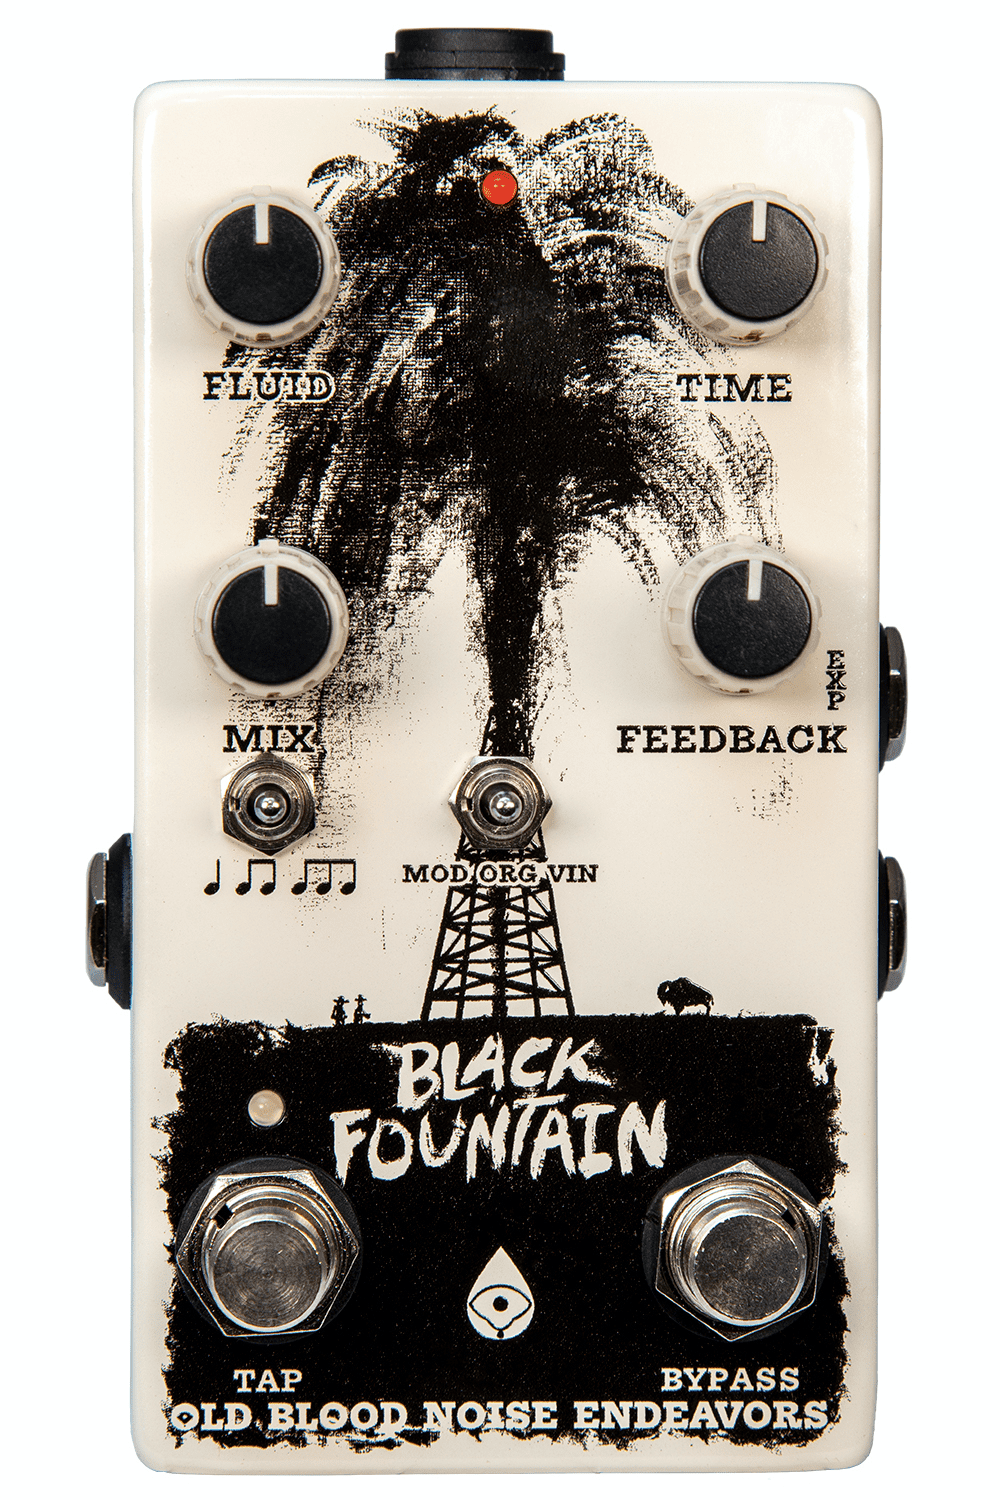 Old Blood Noise Endeavors’ BLACK FOUNTAIN V3 + TAP TEMPO